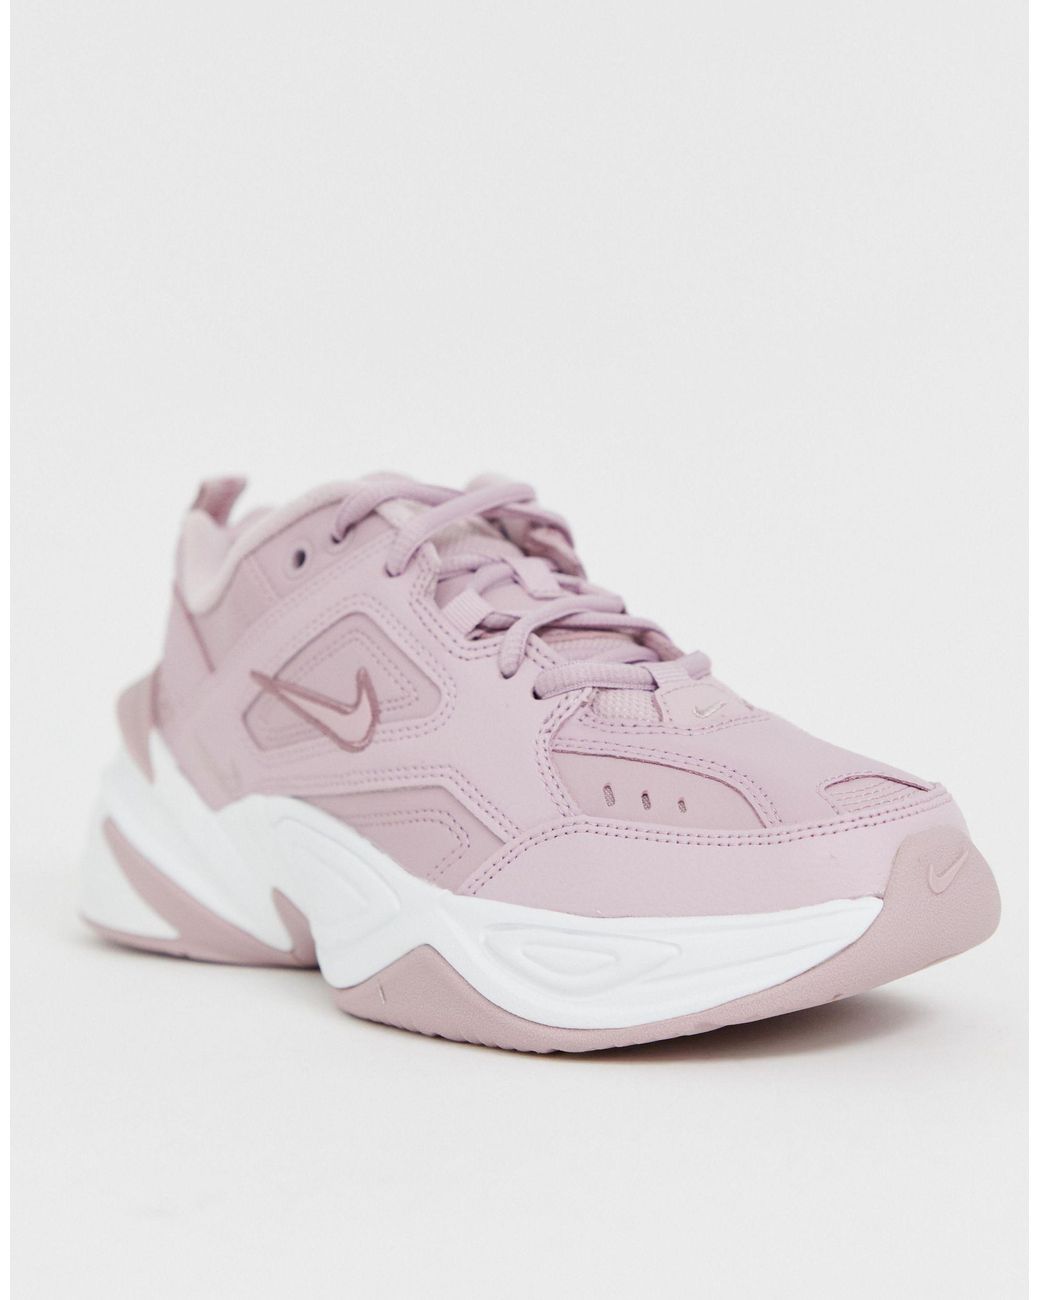 Barbero Barry Exención Nike M2k Tekno Trainers In Pink | Lyst